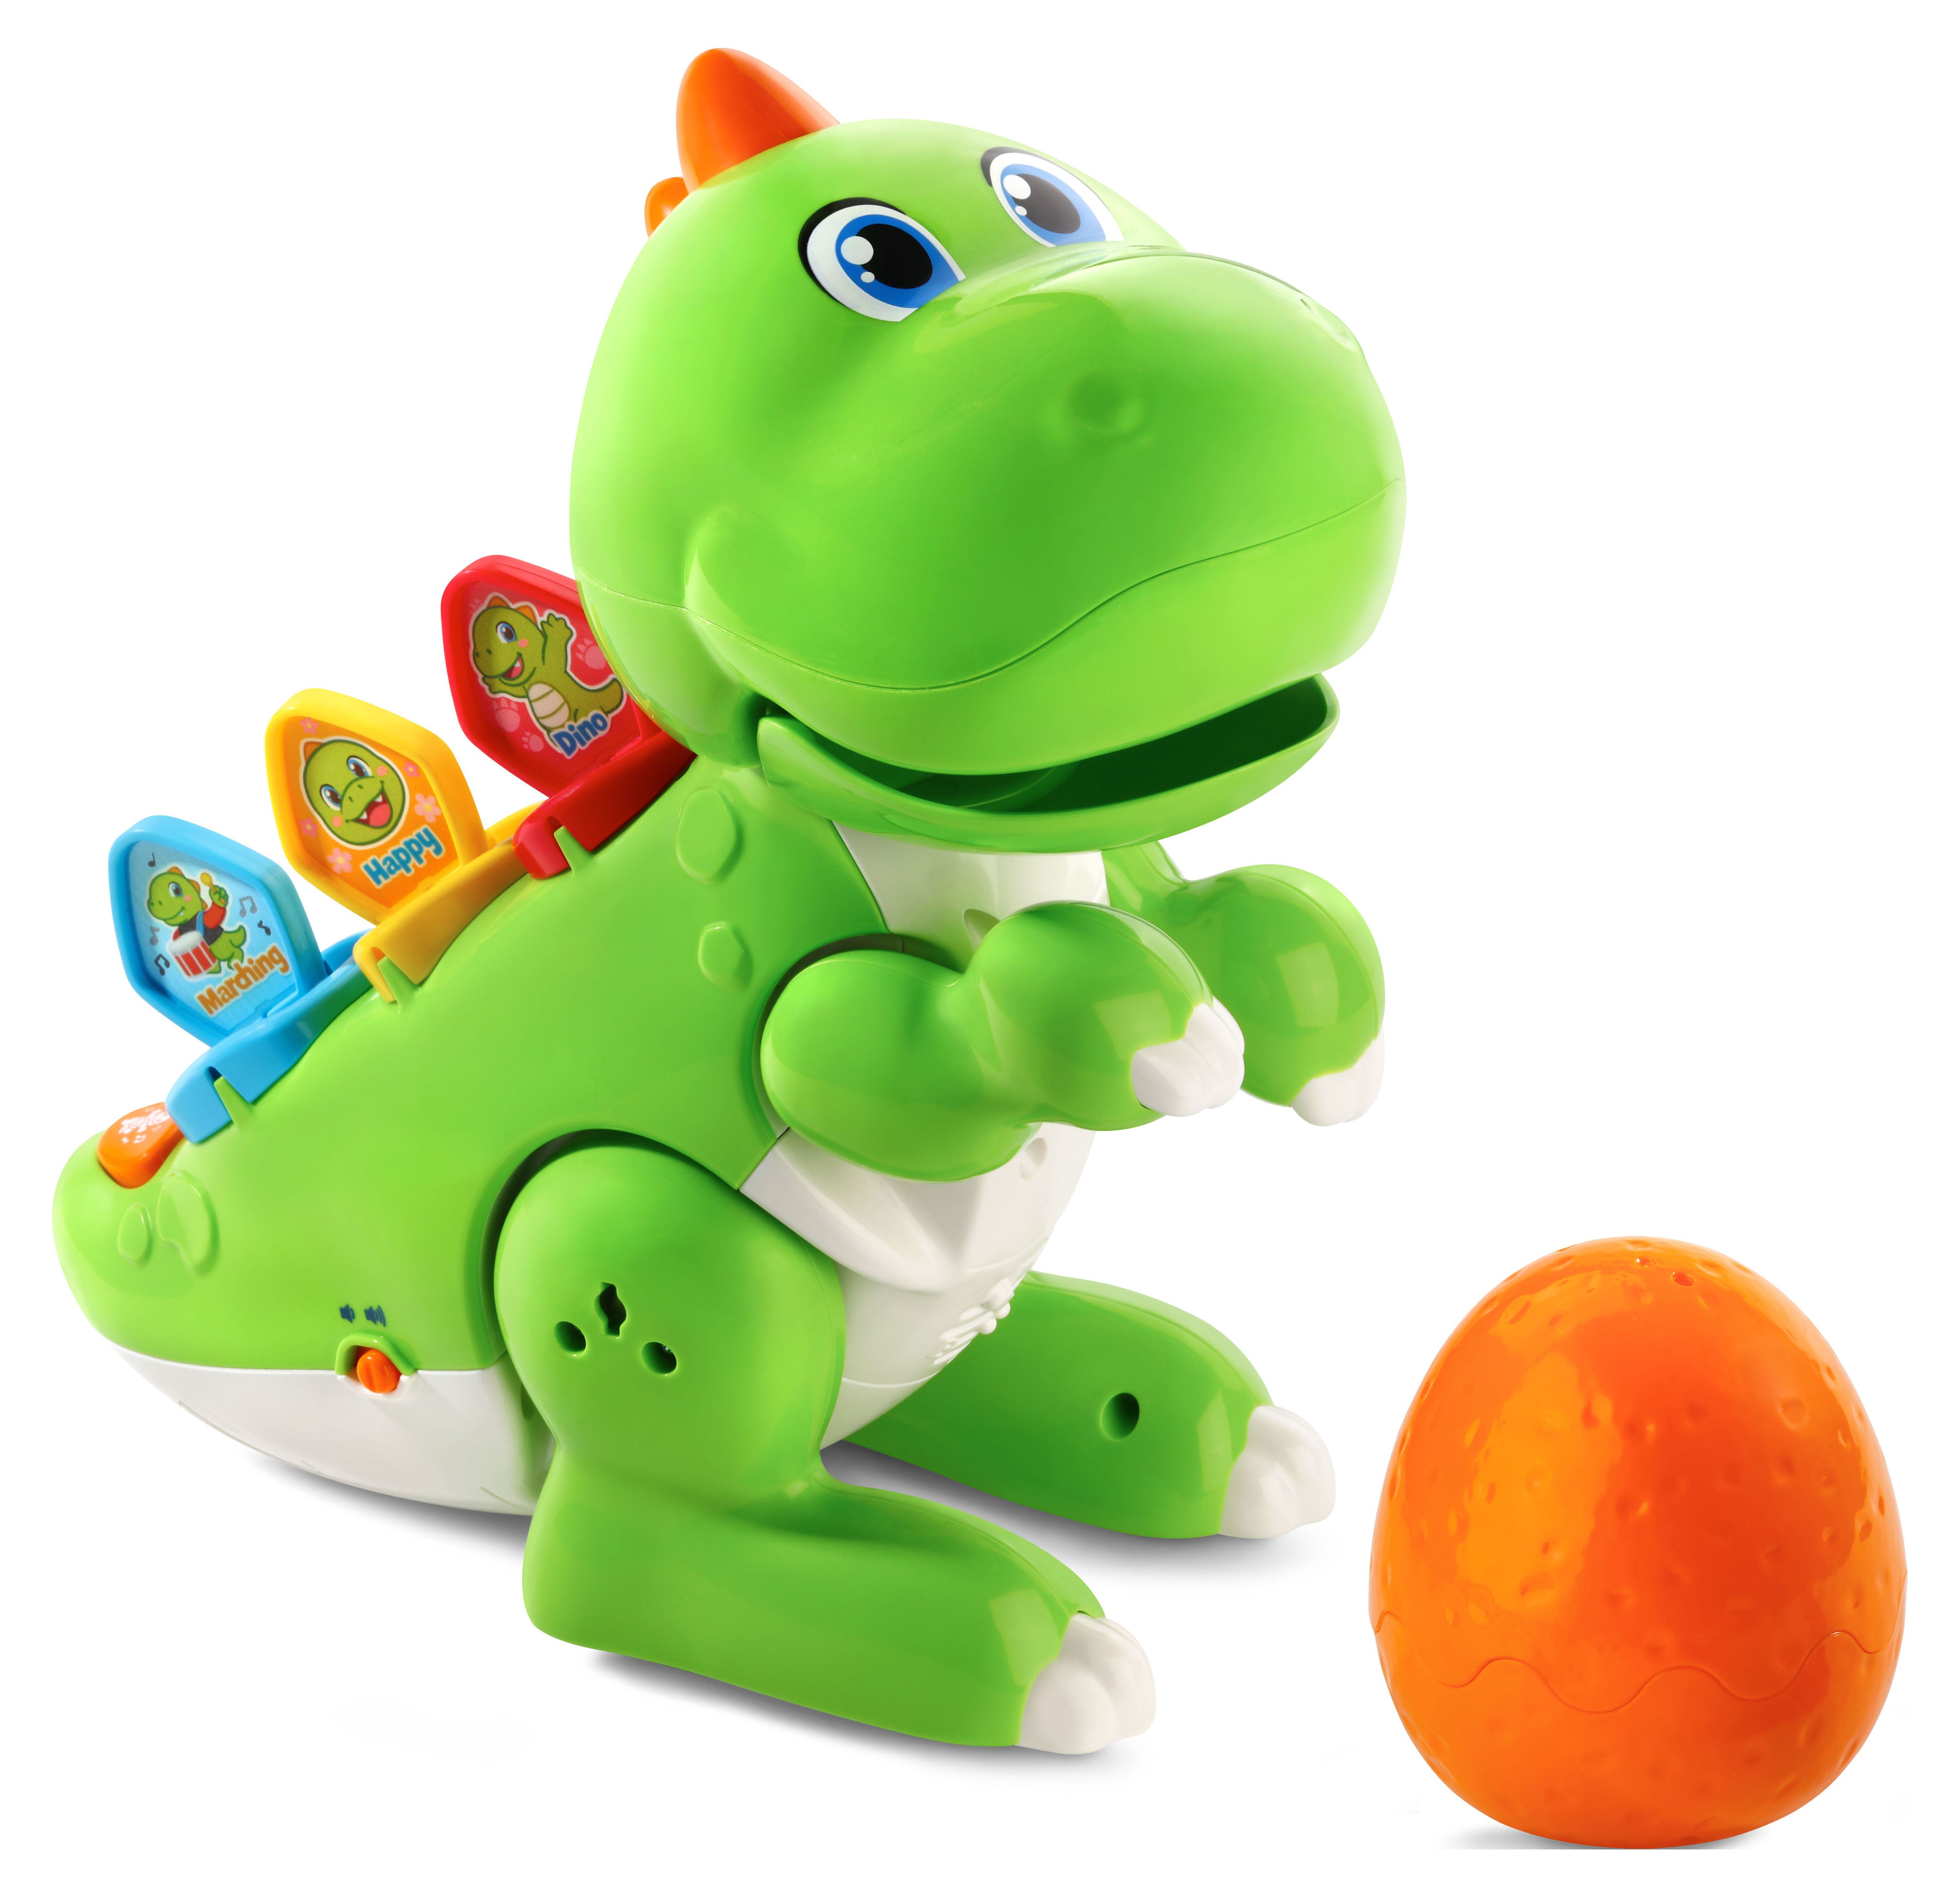 VTech Mix and Match-a-Saurus, Dinosaur Learning Toy for Kids, Green - image 6 of 10